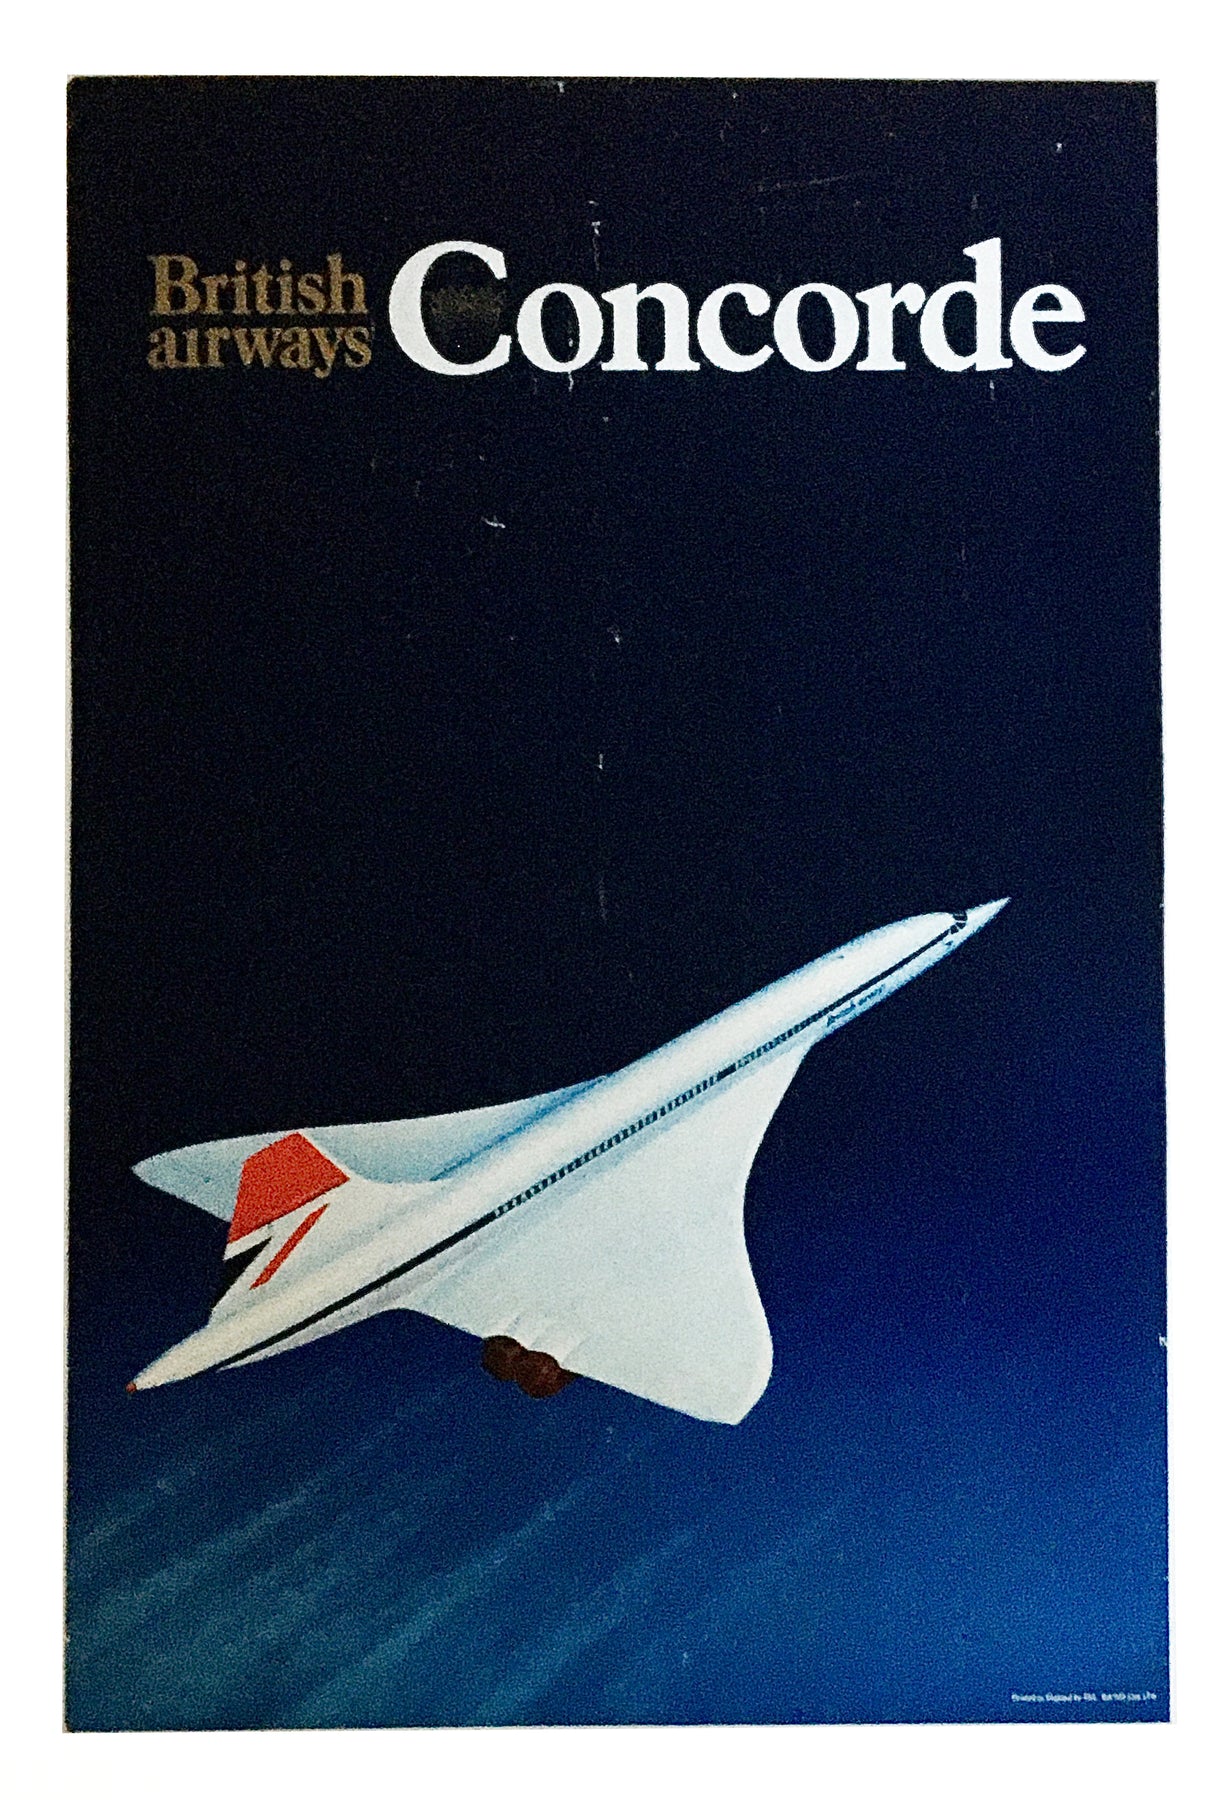 Vintage Airline and Travel Posters Original and Air Line Travel Posters ...